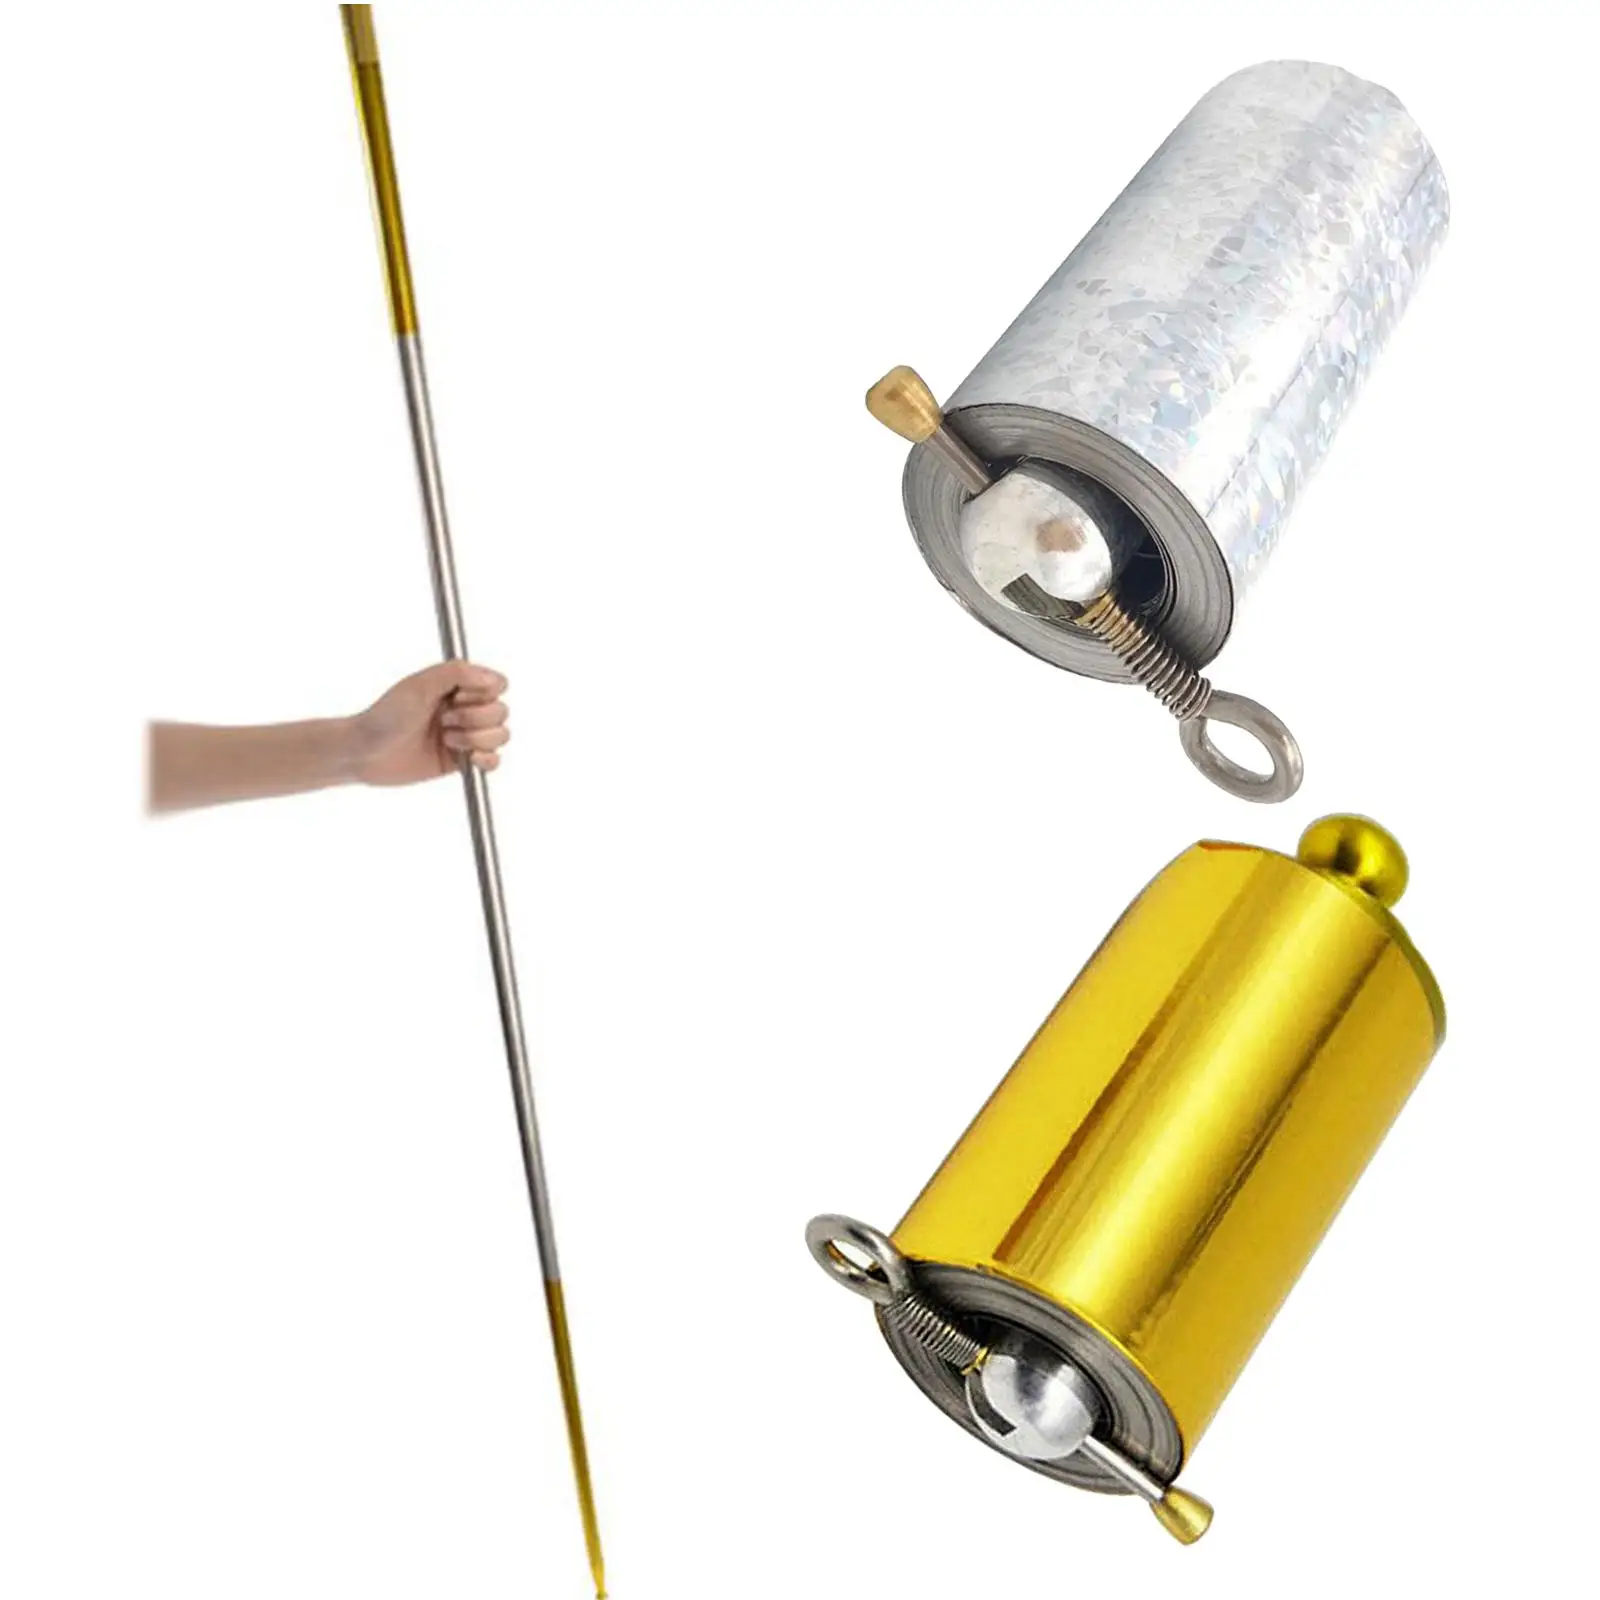 3.6ft/110cm Steel Appearing Cane Pocket Staff Magic Stage Magic Trick Magician Wand Telescopic Rod